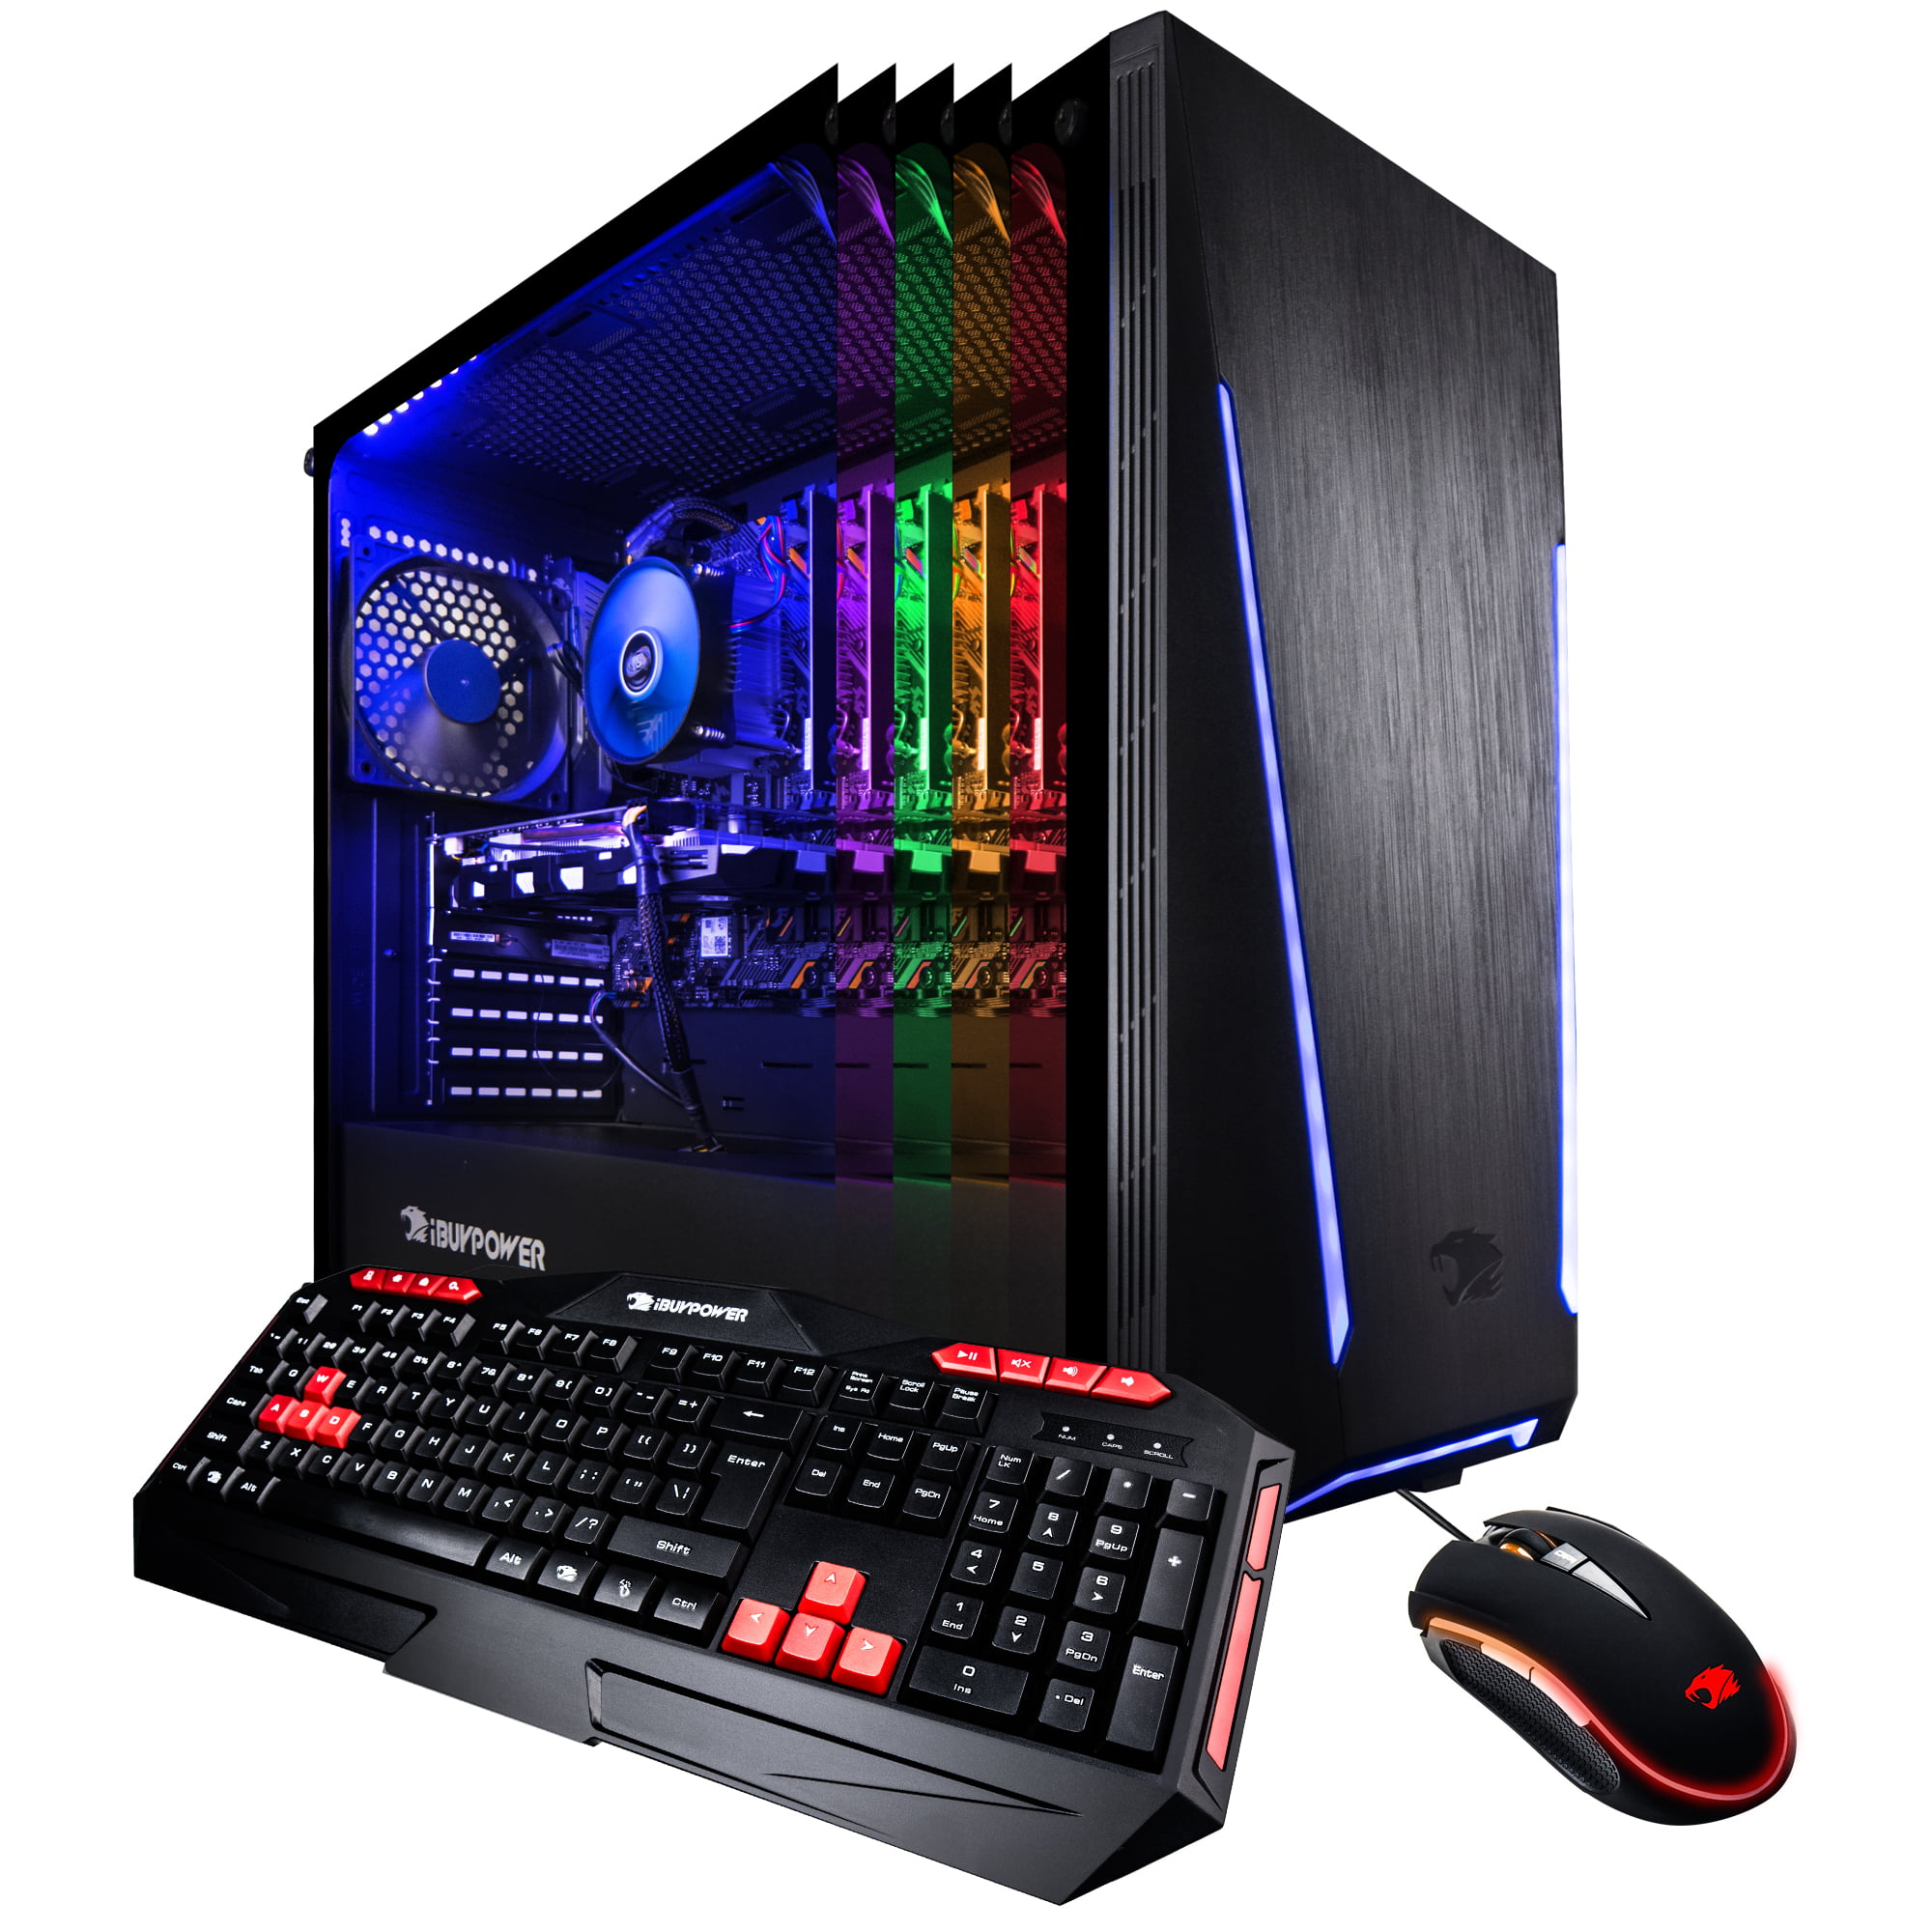 Simple Is The Ibuypower Arc Gaming Desktop Good for Streamer